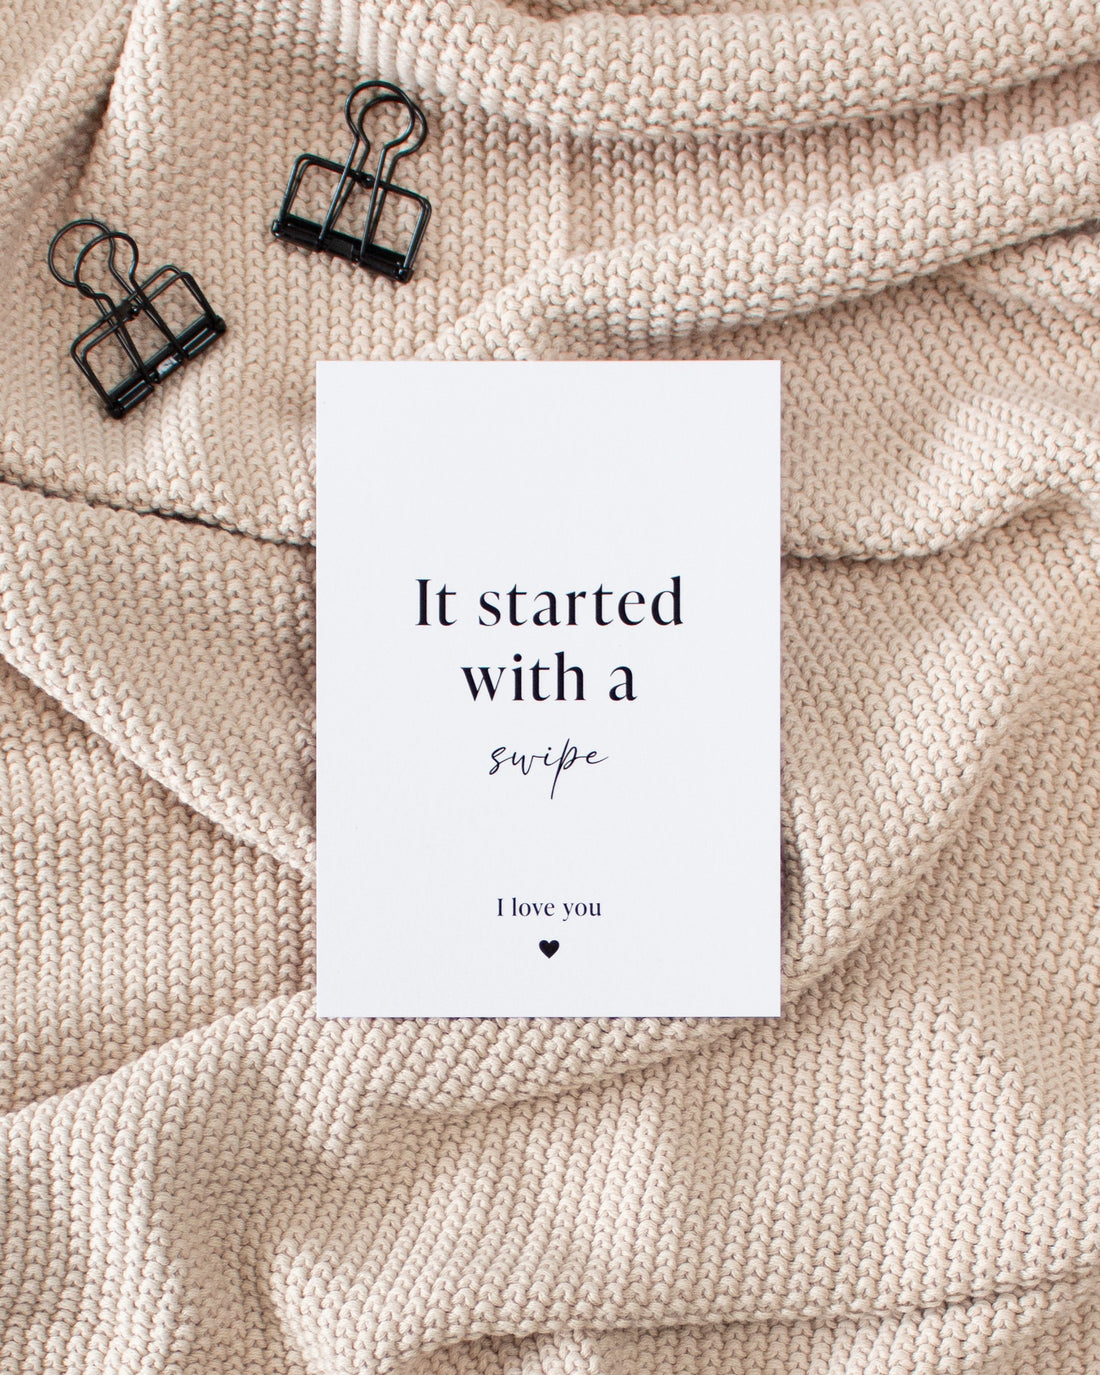 A white postcard with black writing laying on a beige knitted blanket with some black binder clips. The postcard reads &quot;It started with a swipe&quot; in the middle and &quot;I love you&quot; in smaller text with a small heart in the bottom of the card.